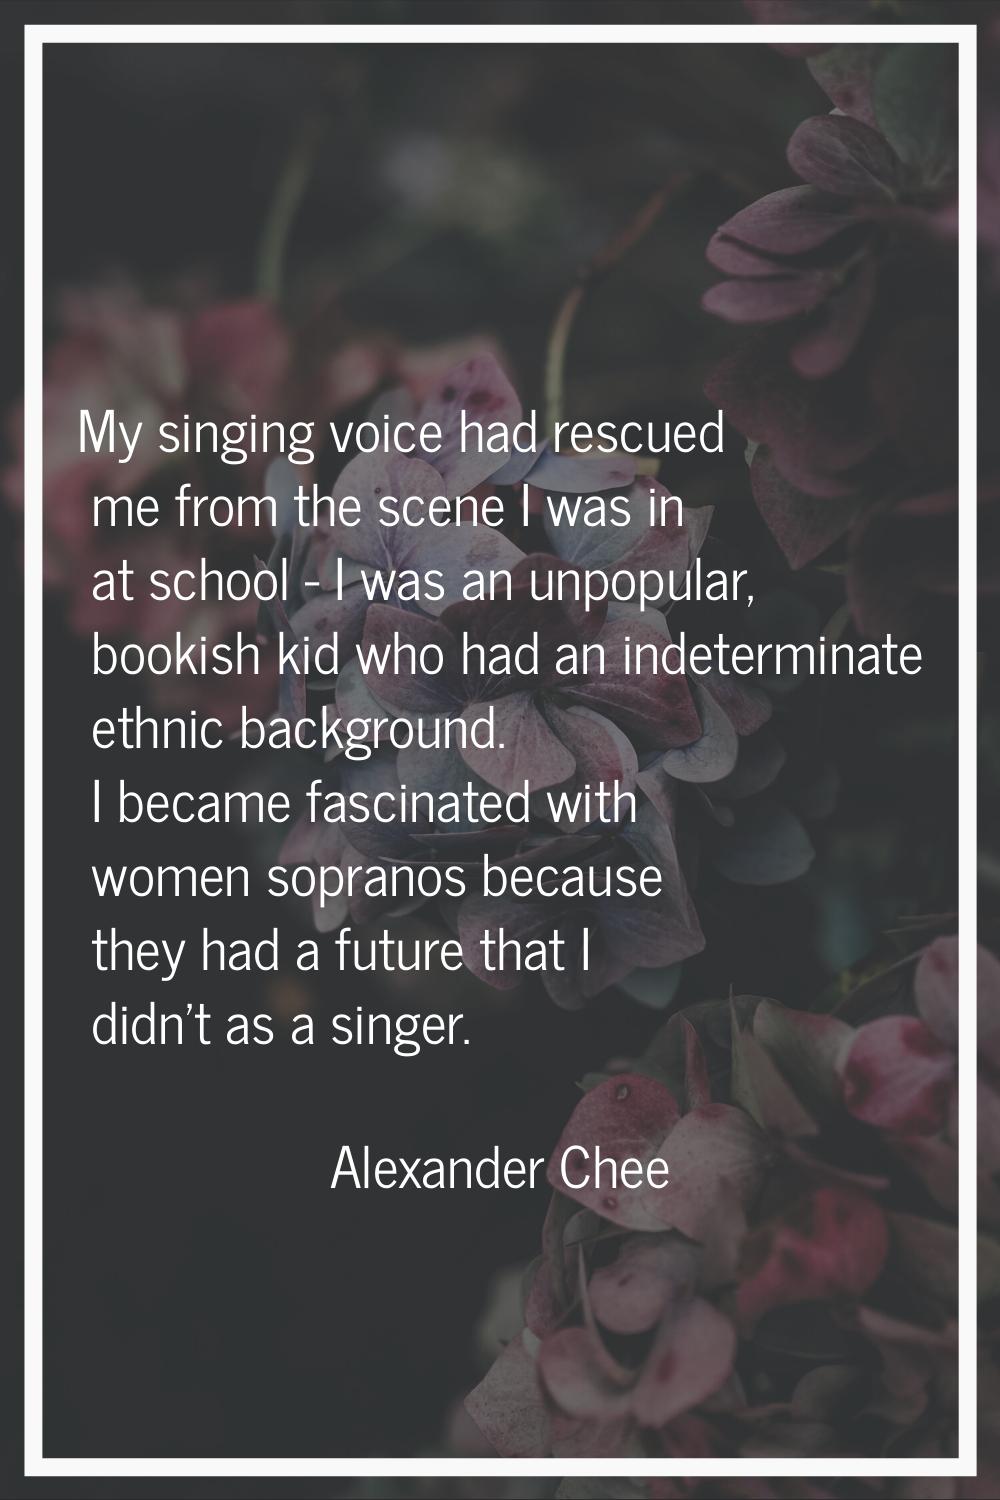 My singing voice had rescued me from the scene I was in at school - I was an unpopular, bookish kid